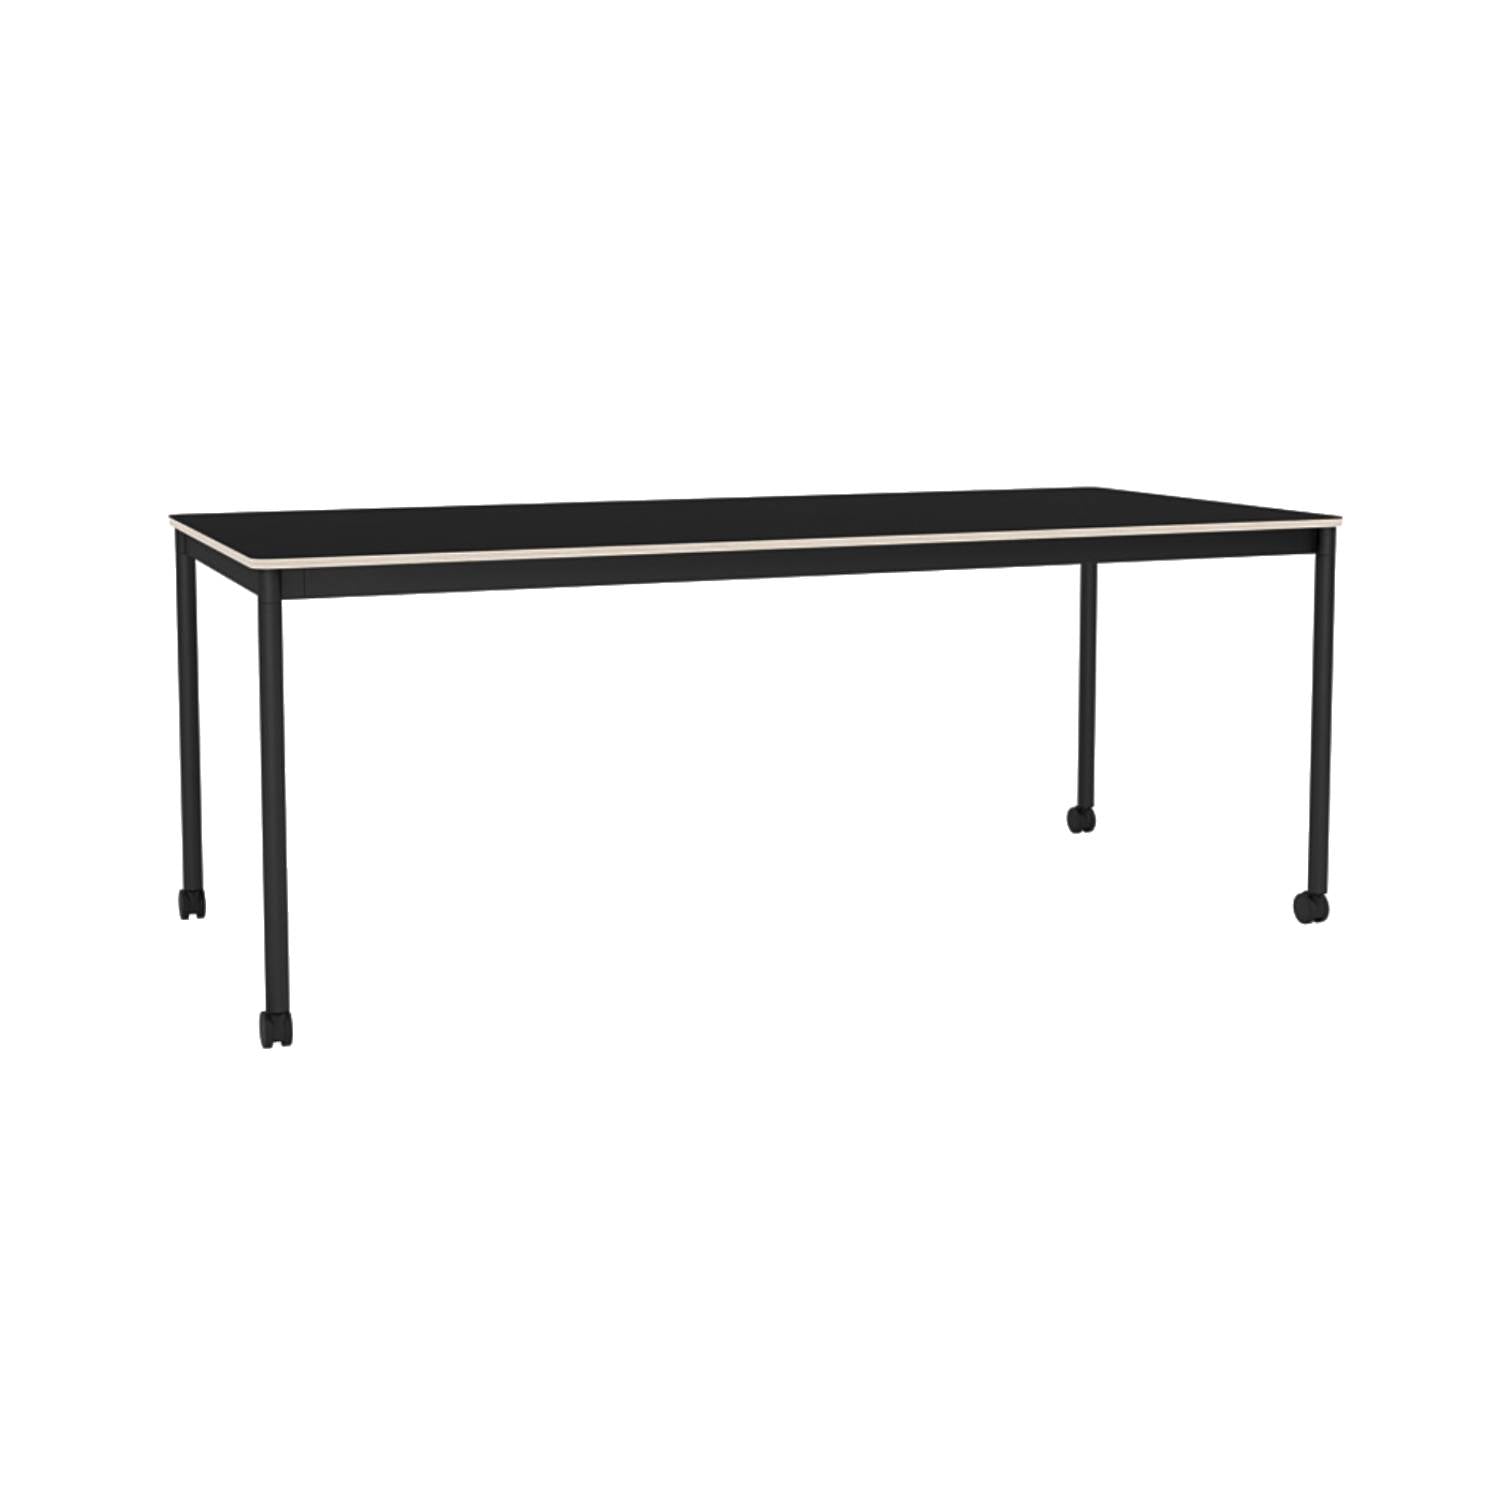 Base Table with Castors: 74.8